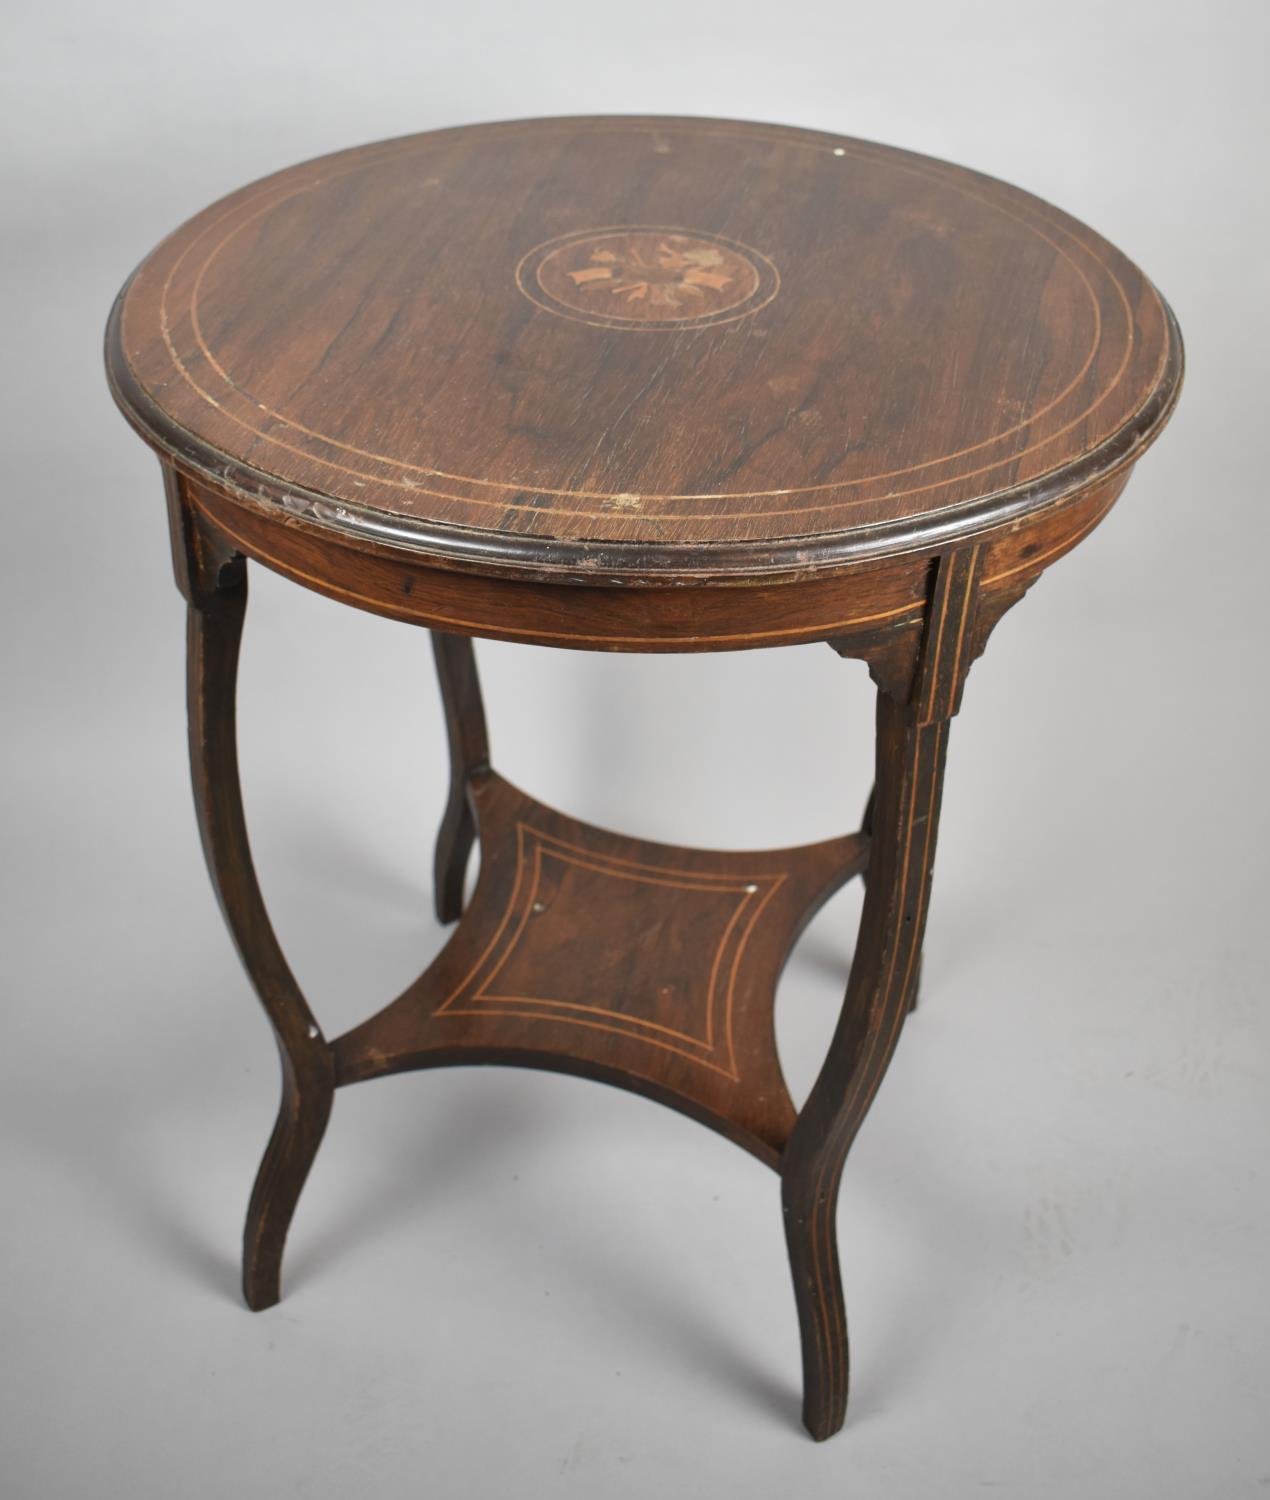 An Edwardian Inlaid Circular Table with Stretcher Shelf, Extended Cabriole Supports, 60cm Diameter